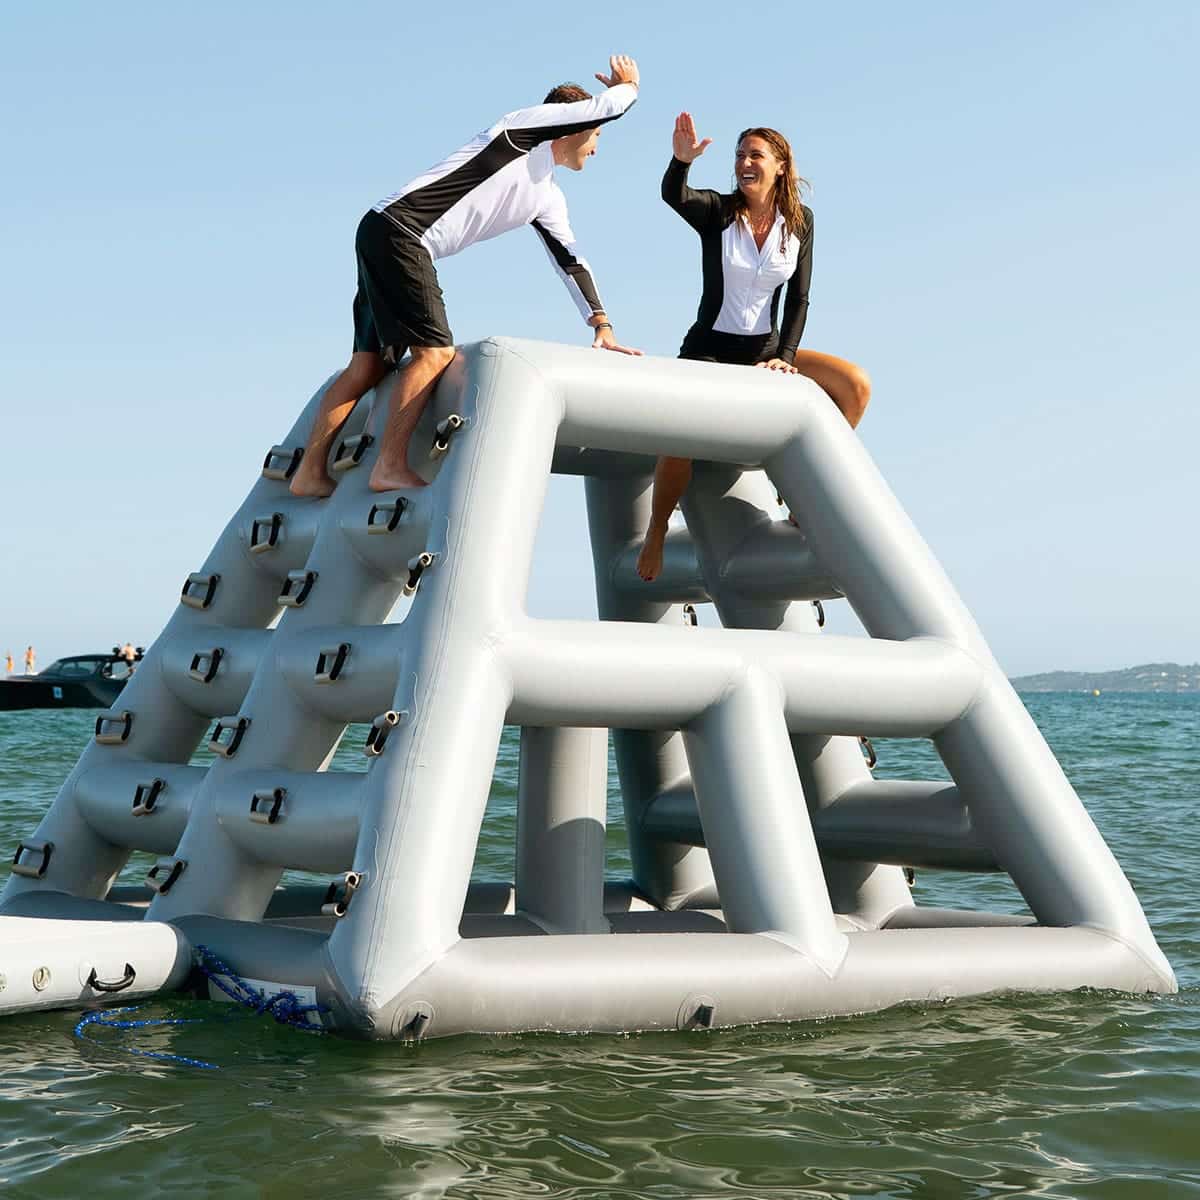 Two people high-five at the top of an inflatable climbing frame